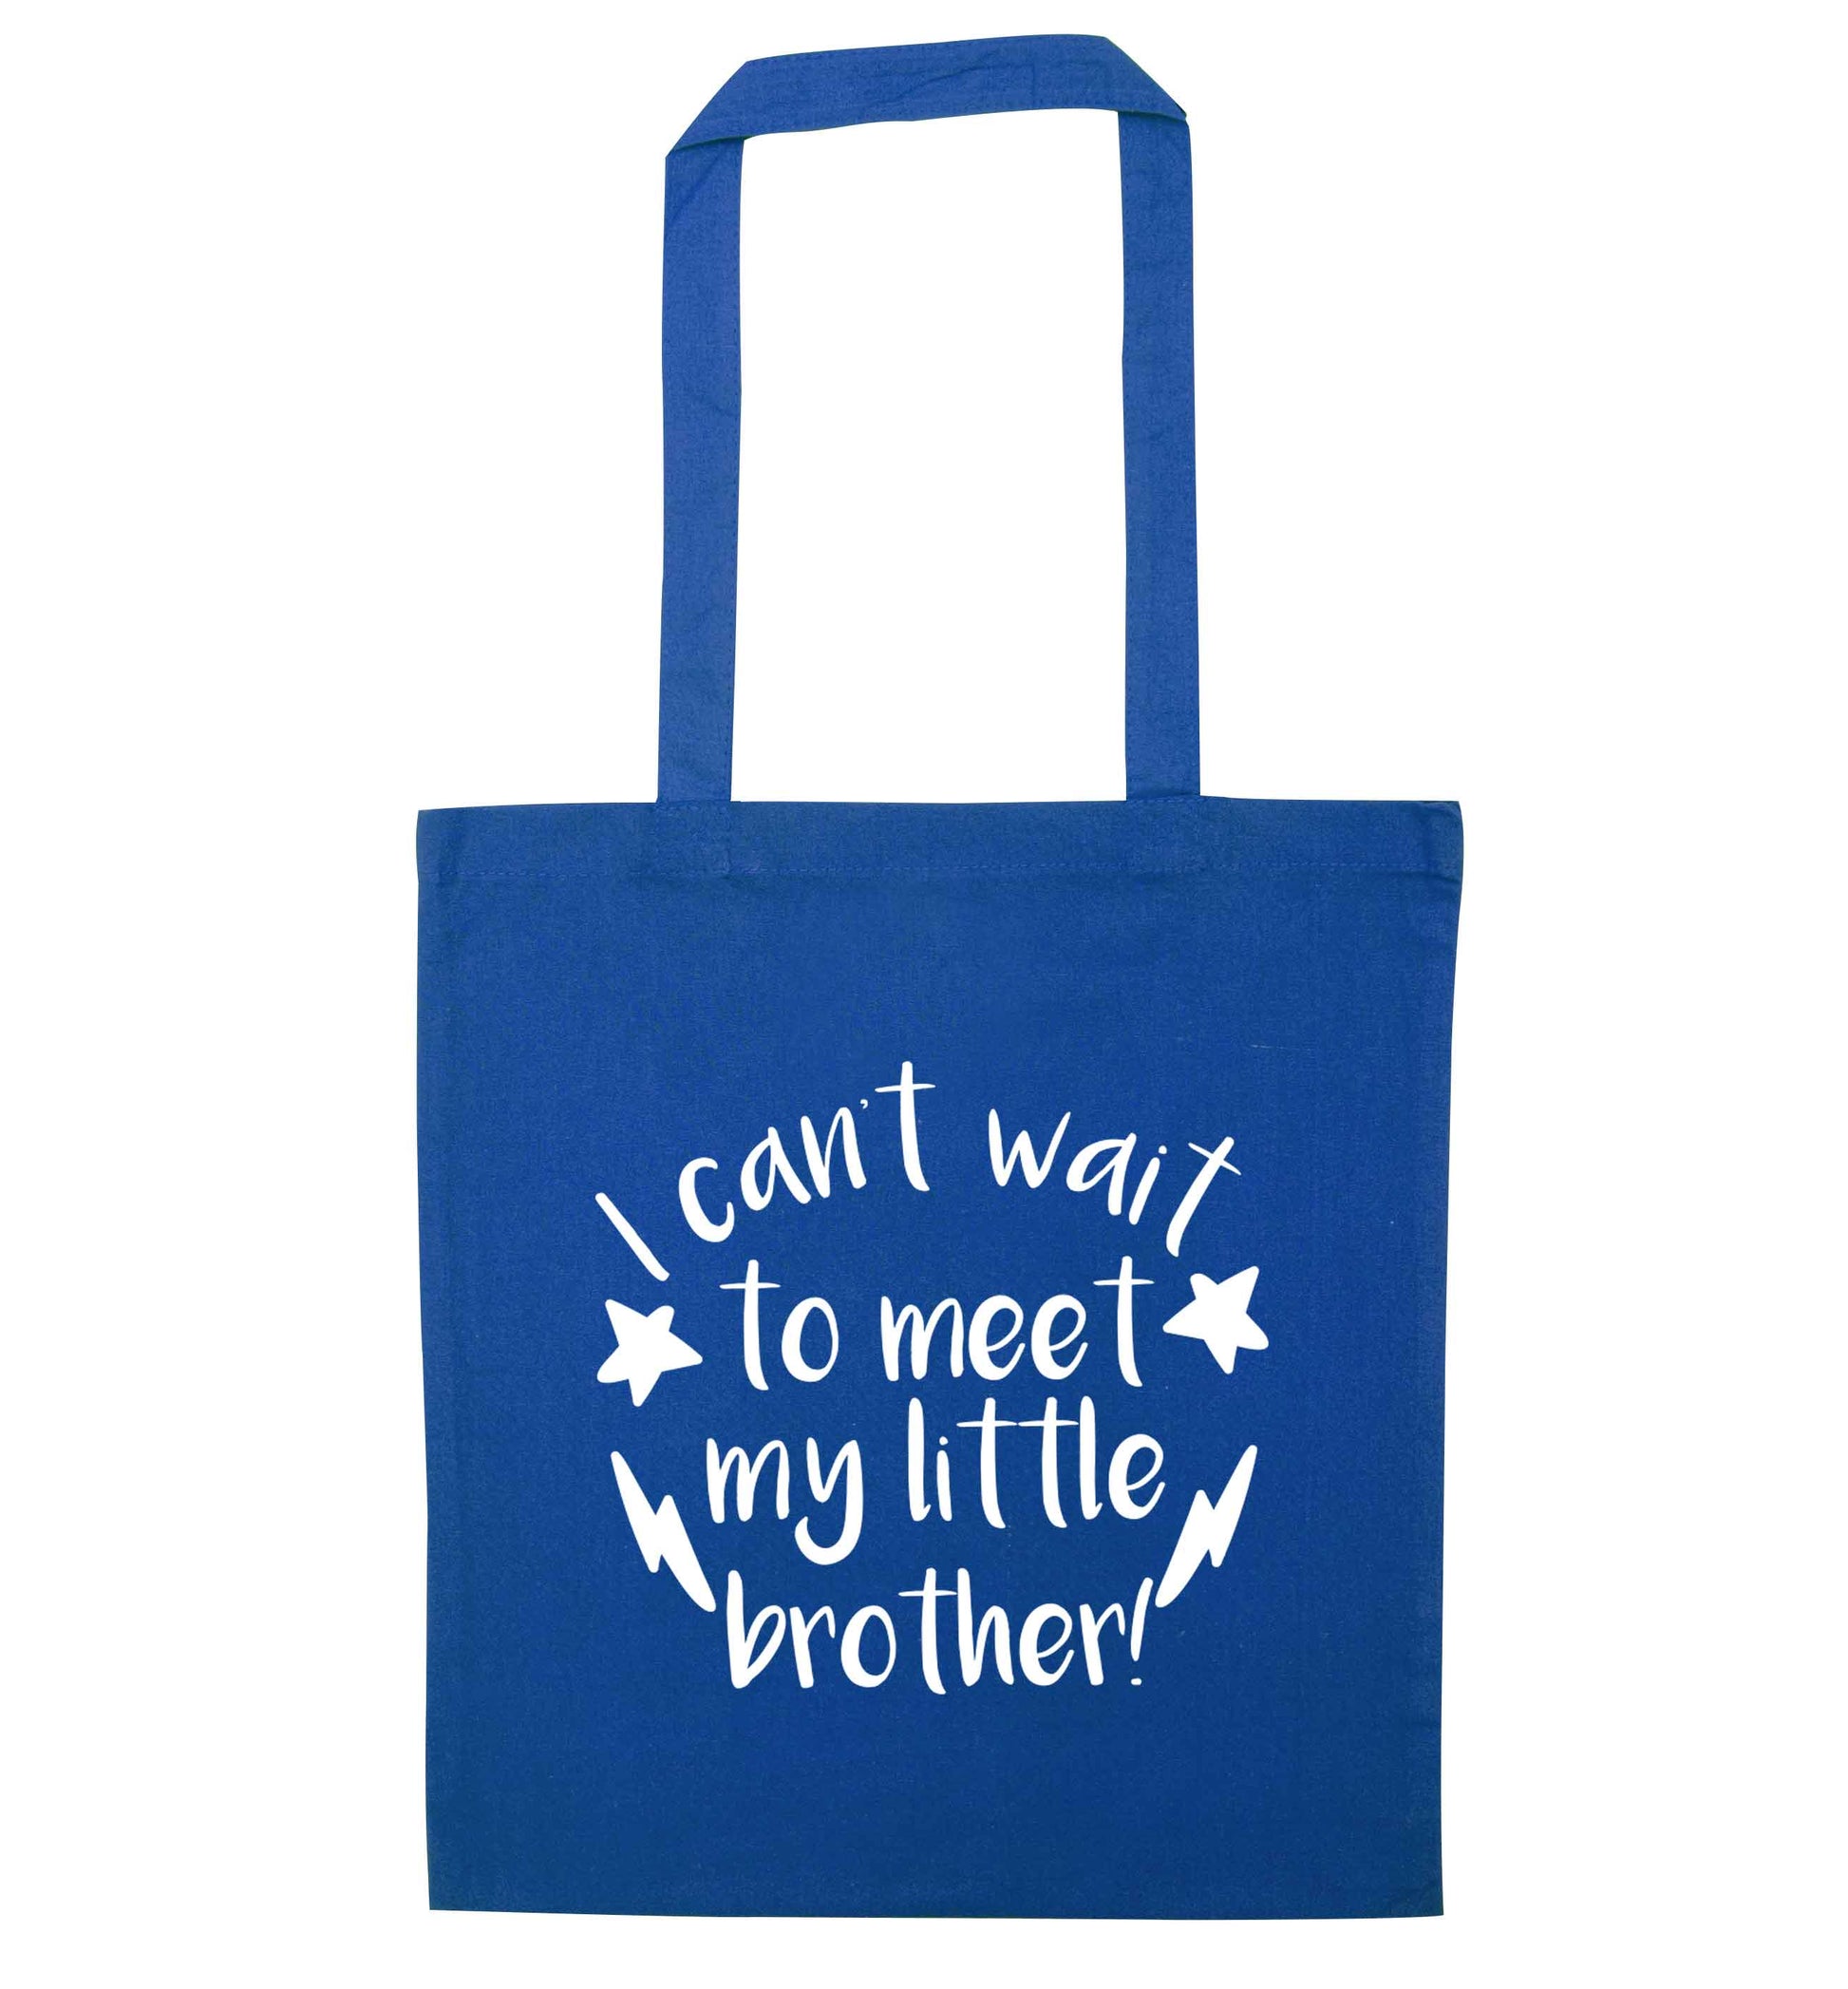 I can't wait to meet my sister! blue tote bag